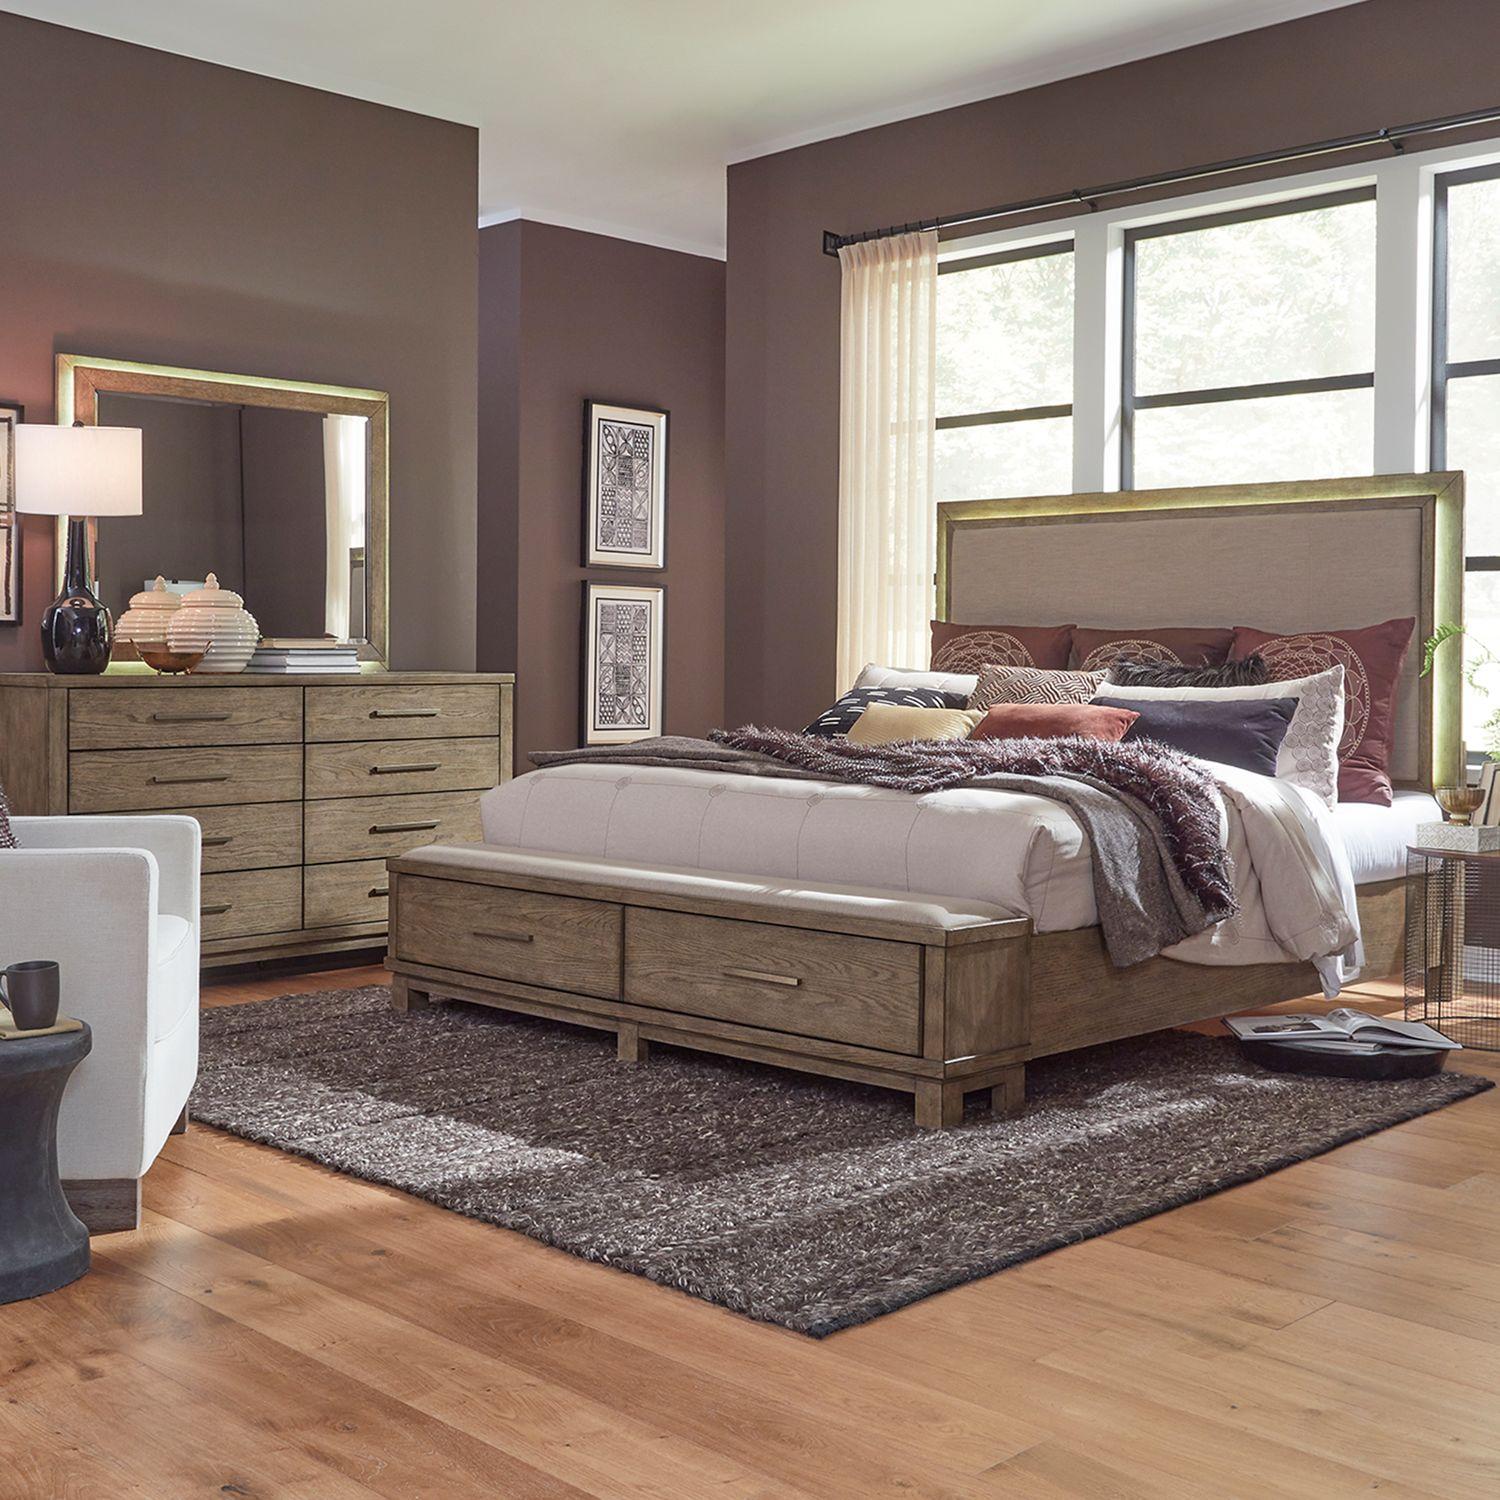 Classic Storage Bedroom Set Canyon Road (876-BR) 876-BR-QSBDM in Brown 